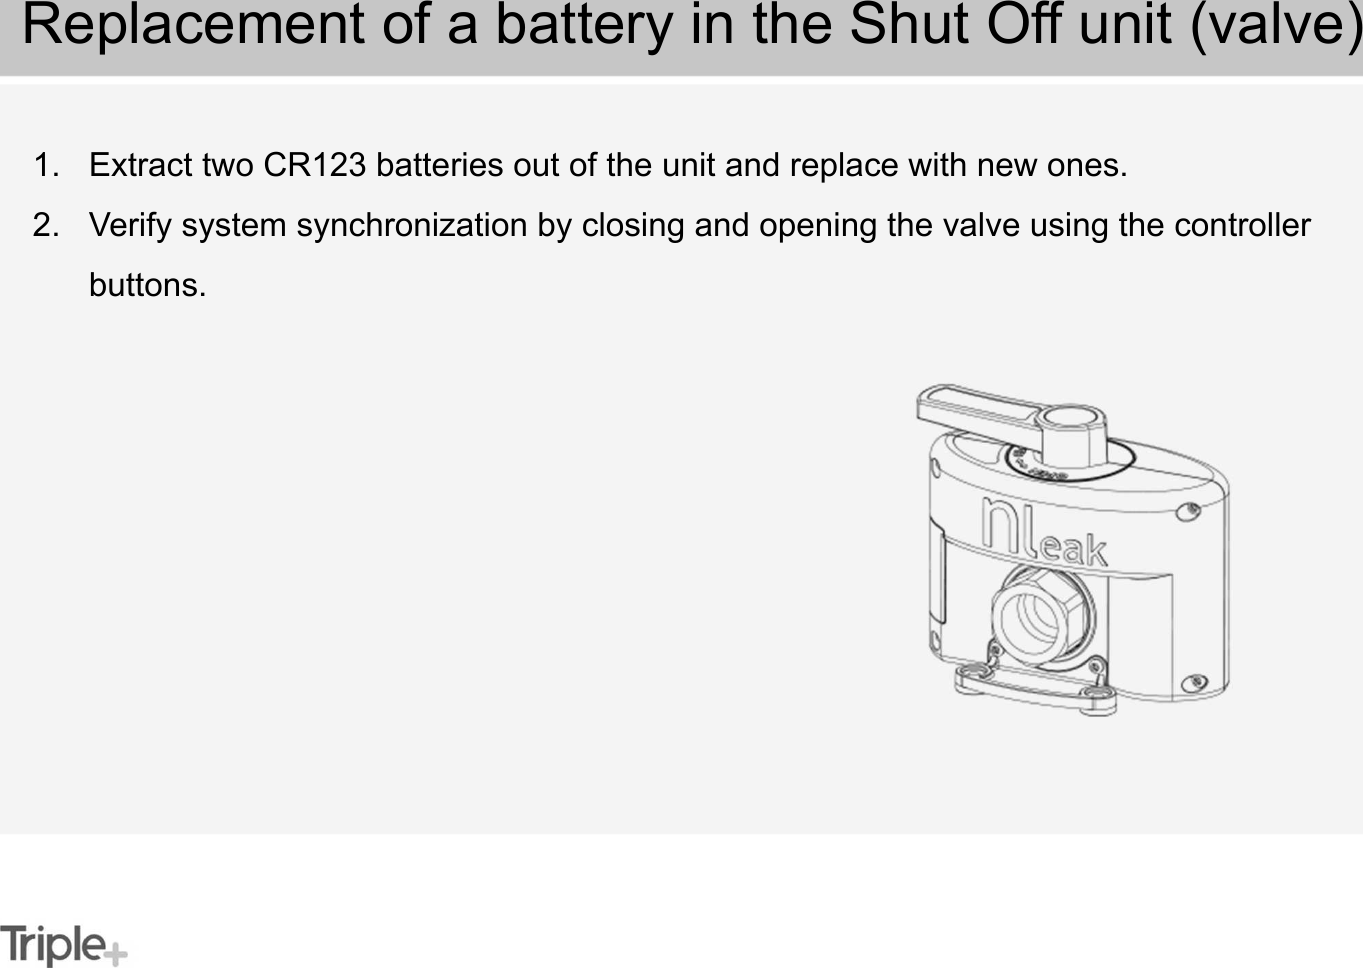 1. Extract two CR123 batteries out of the unit and replace with new ones.2. Verify system synchronization by closing and opening the valve using the controller buttons.Replacement of a battery in the Shut Off unit (valve)